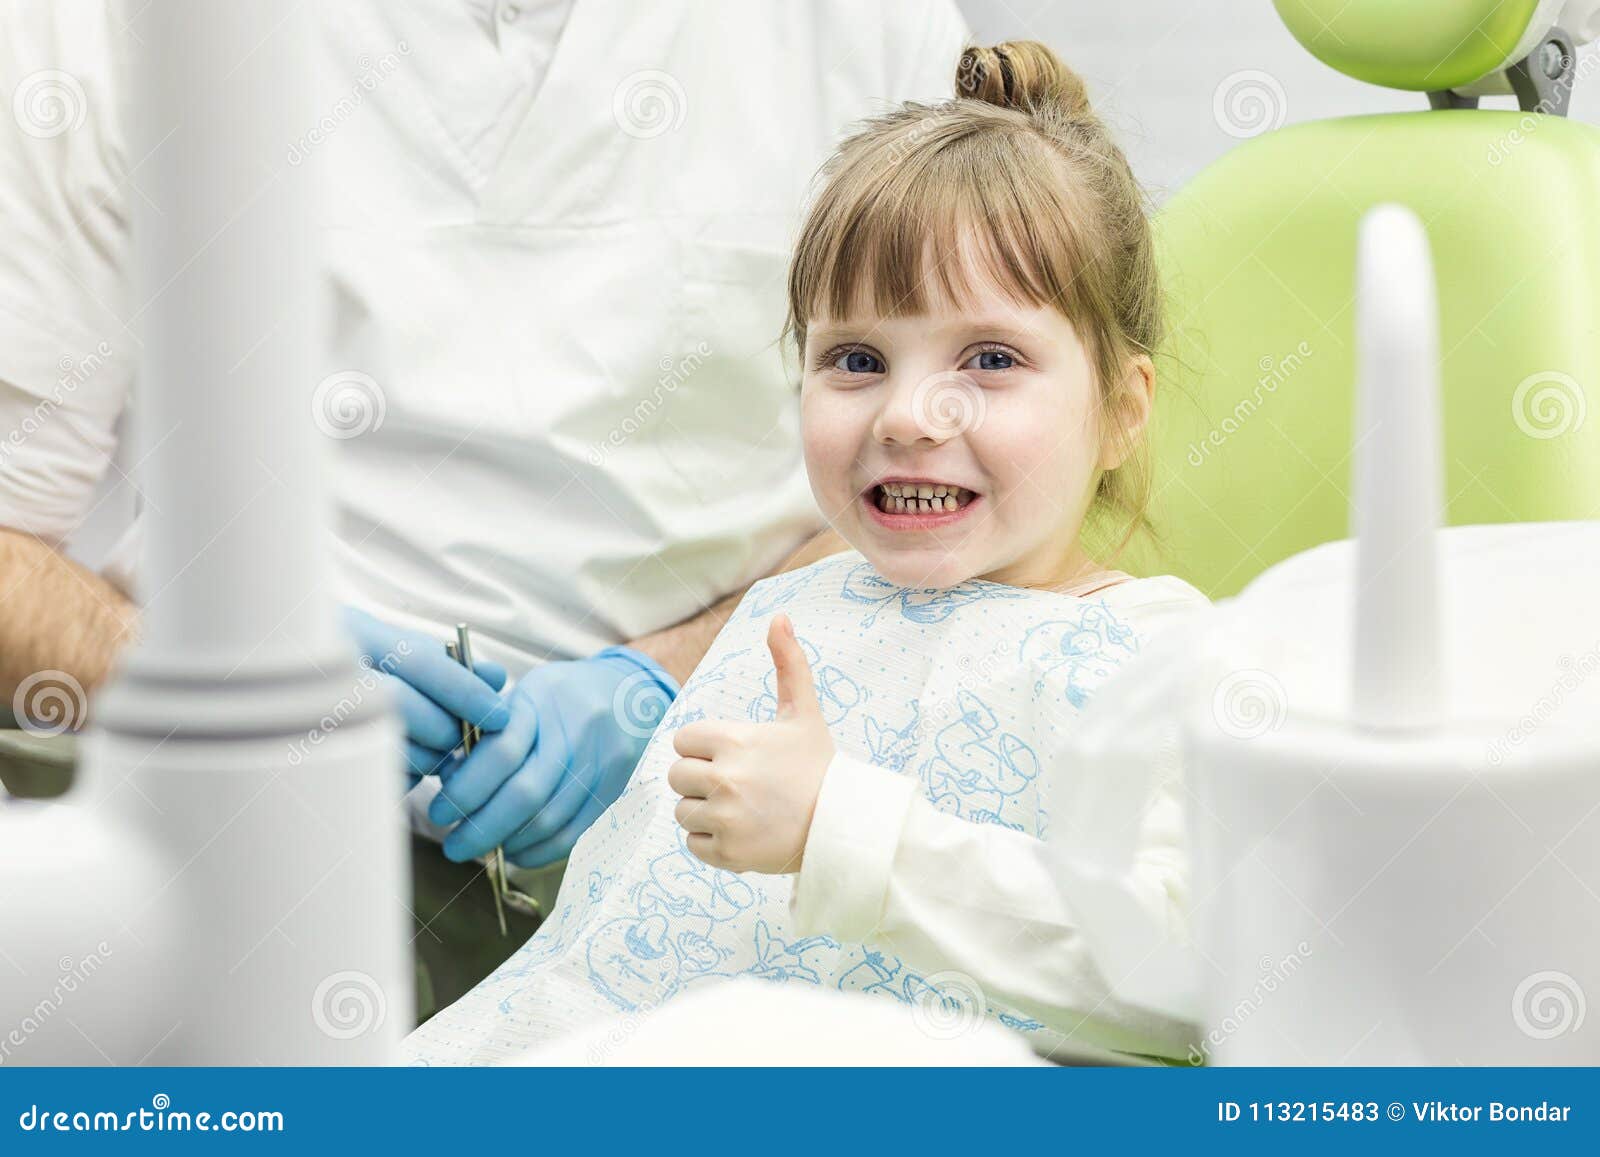 cute little girl showing thumb up sign at dentist`s office clin